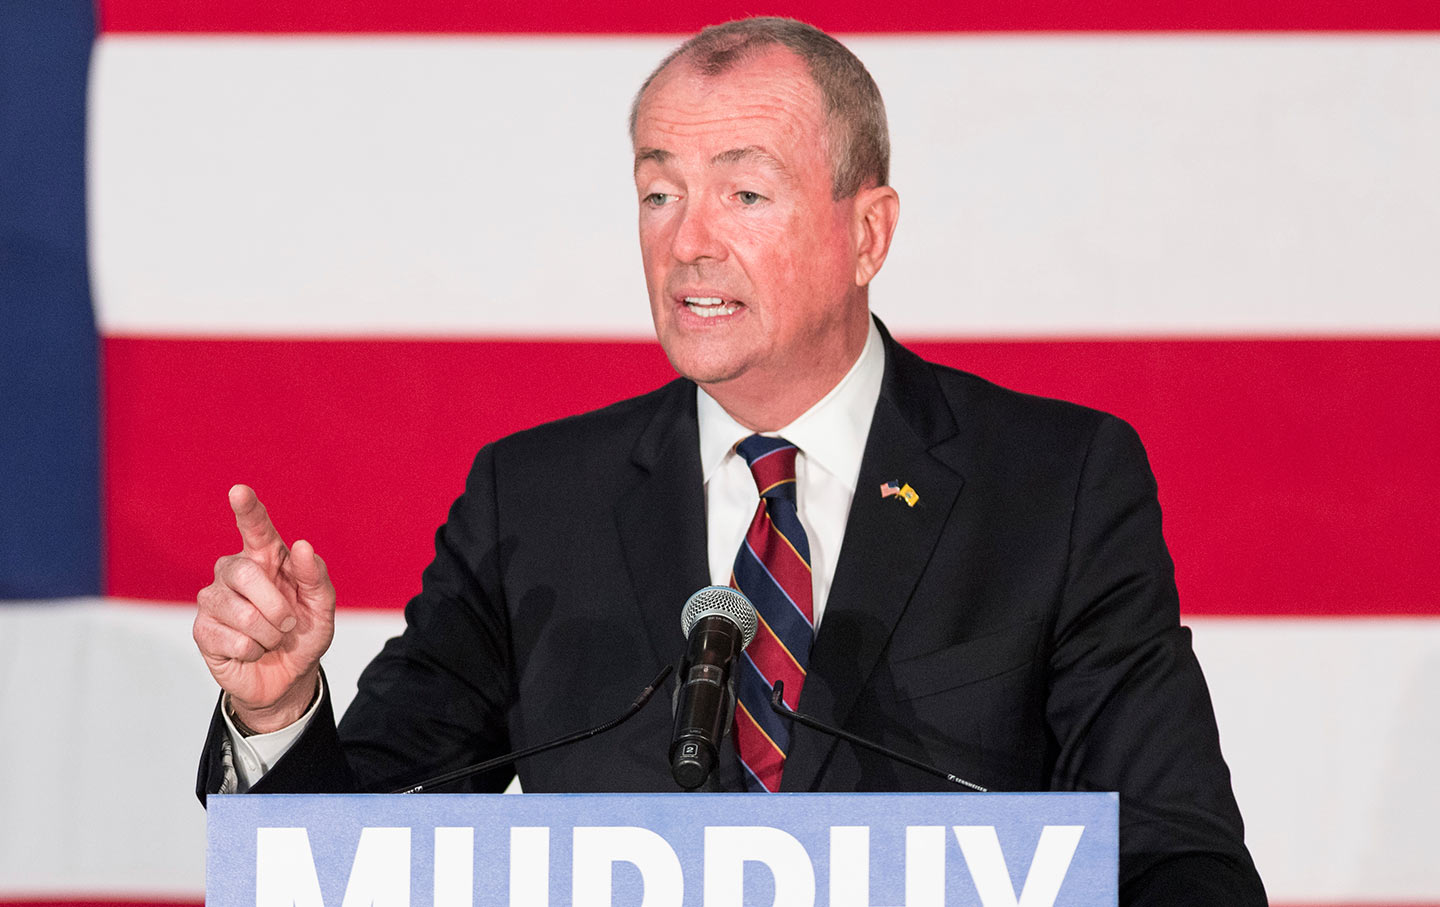 https://www.thenation.com/wp-content/uploads/2017/11/new-jersey-phil-murphy-ap-img.jpg?scale=896&compress=80